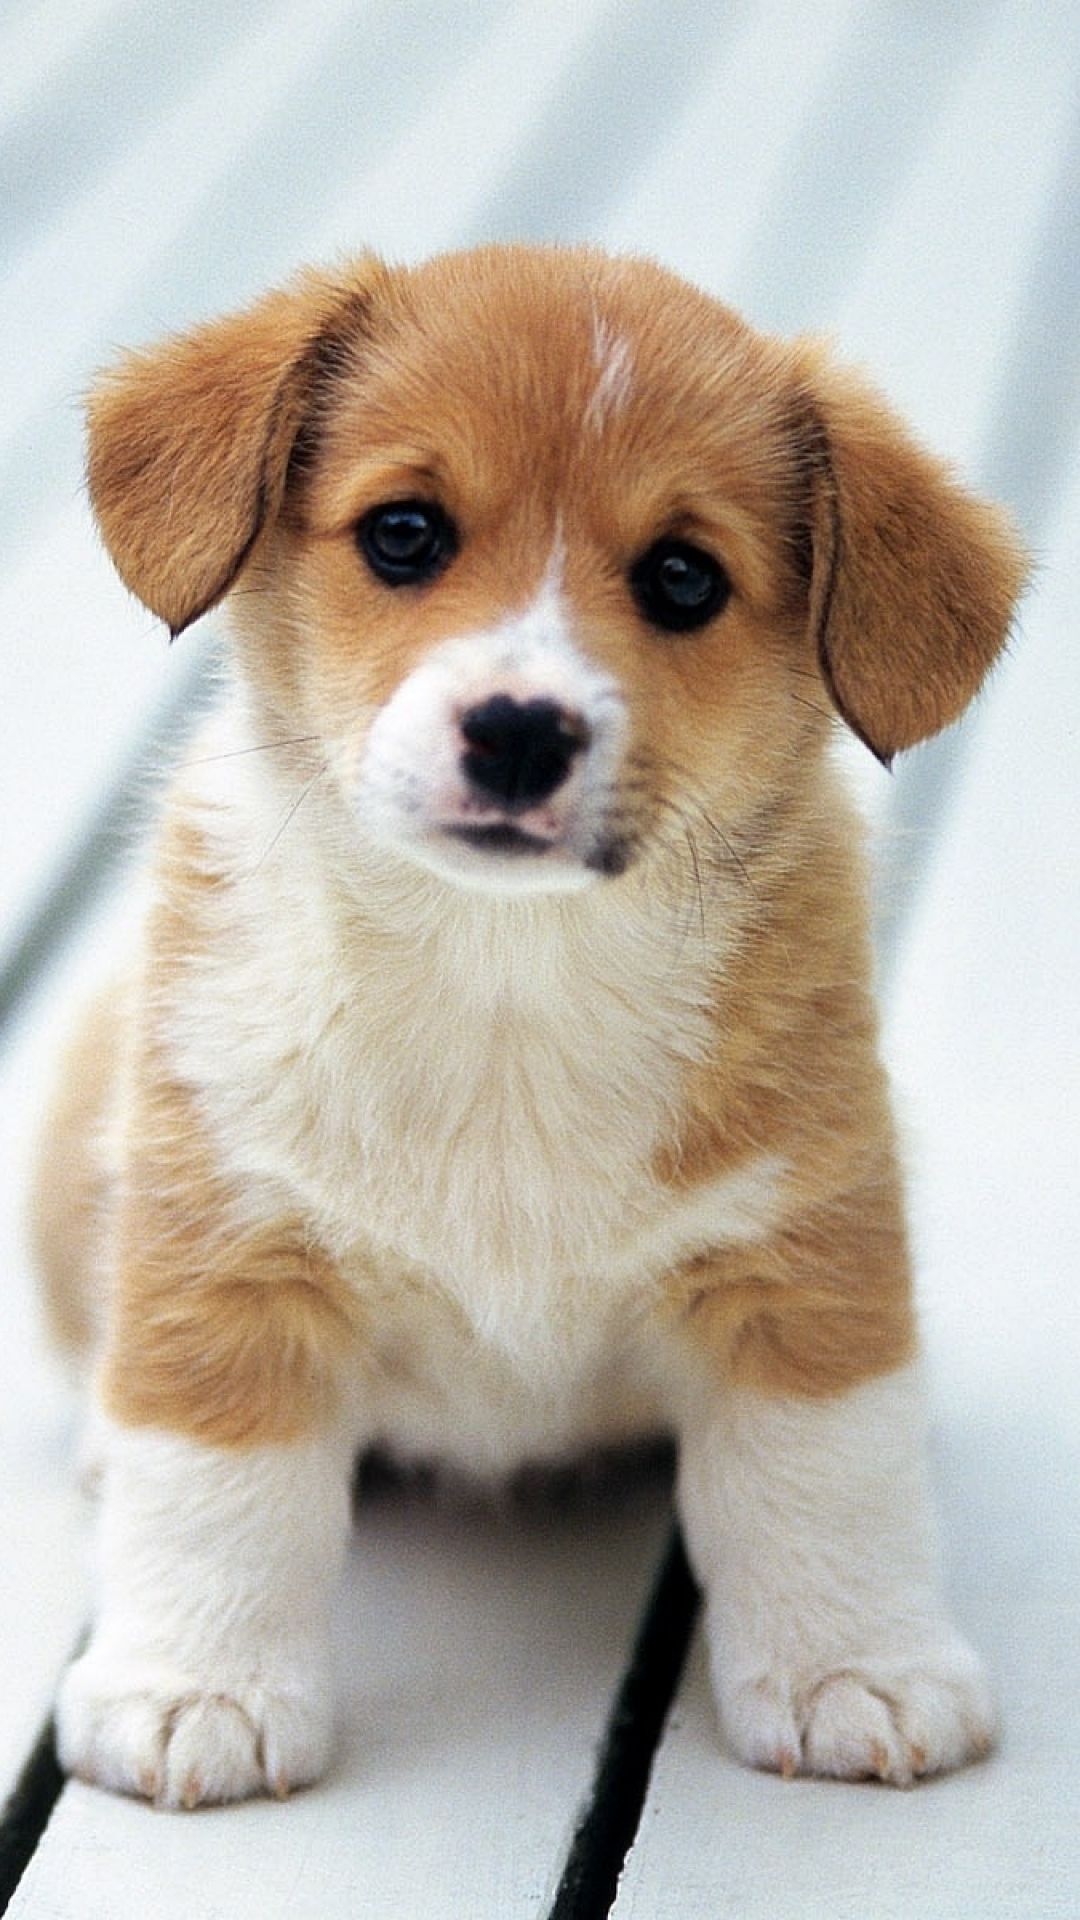 Puppy iPhone Wallpaper, Dog Mobile Phone Background